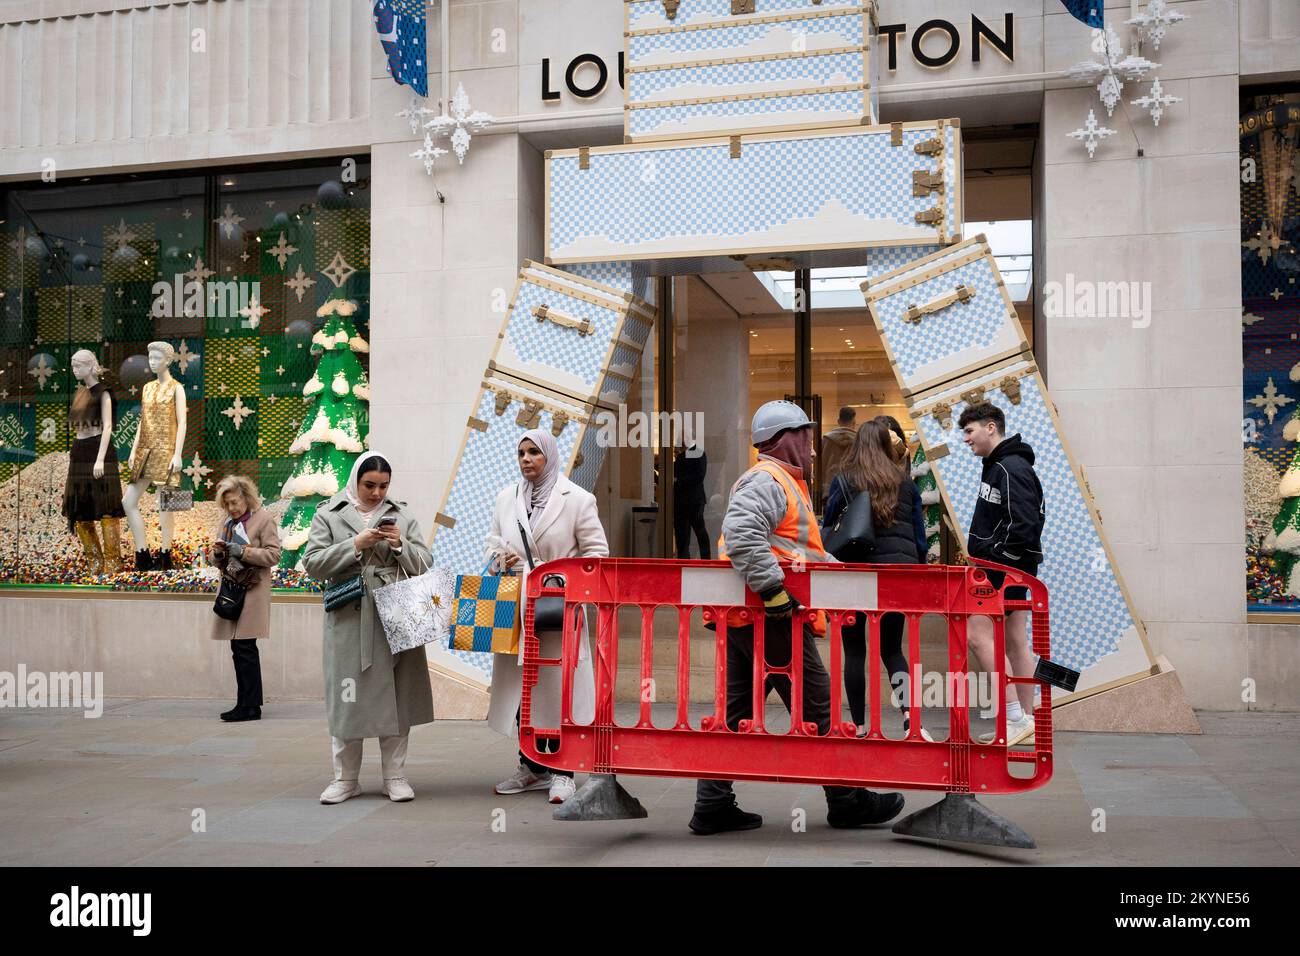 Louis Vuitton Teams Up With Lego on Holiday Window Displays